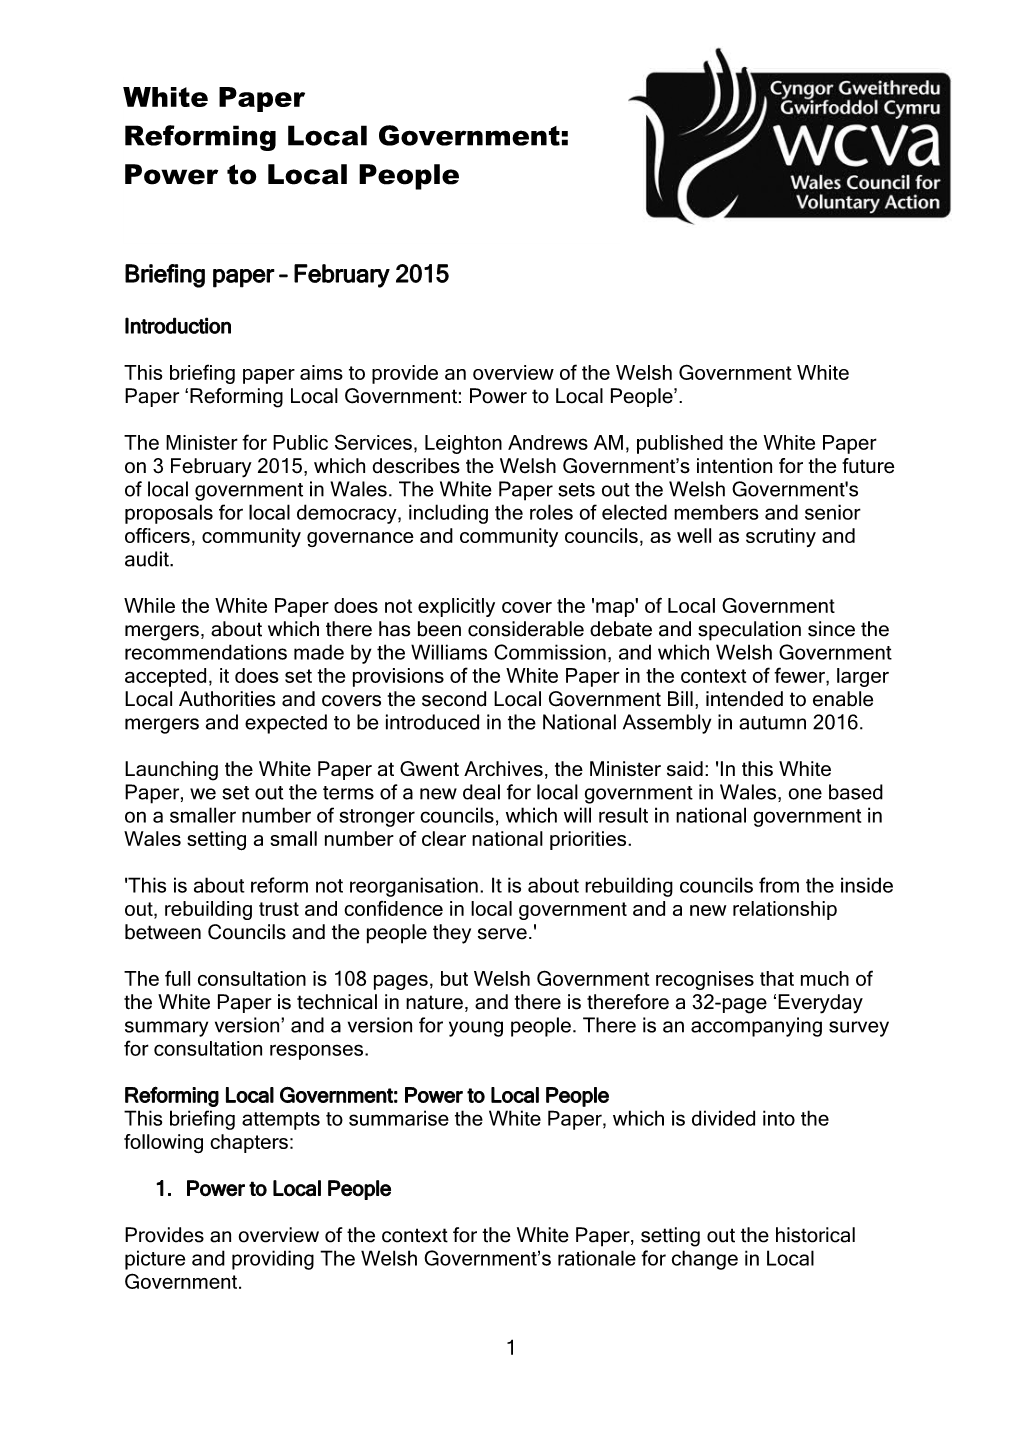 Briefing Paper February 2015